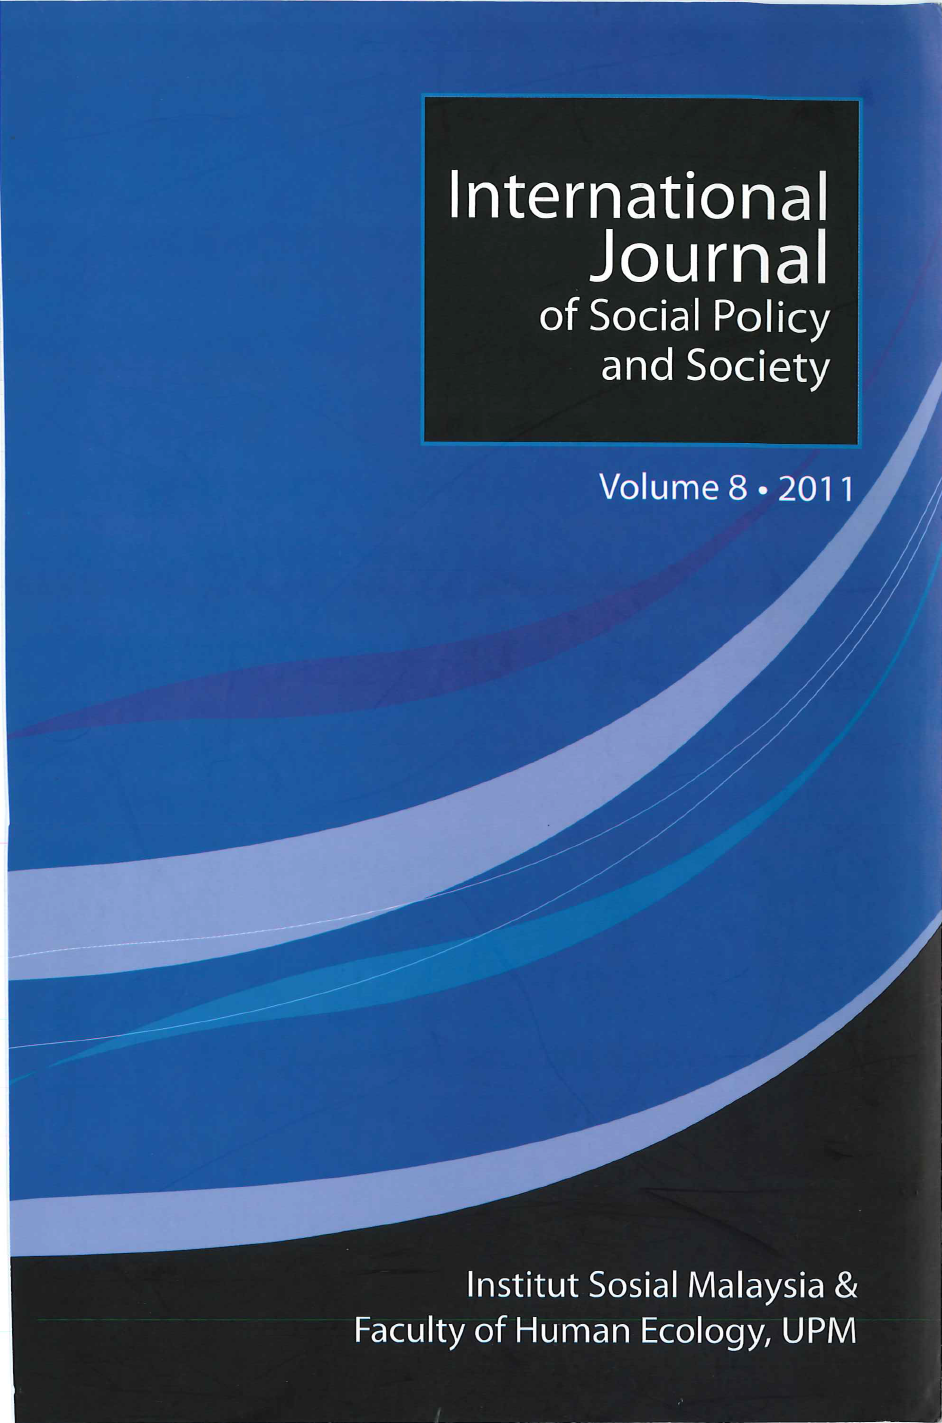 					View Vol. 8 (2011): International Journal of Social Policy and Society Volume 8 2011
				